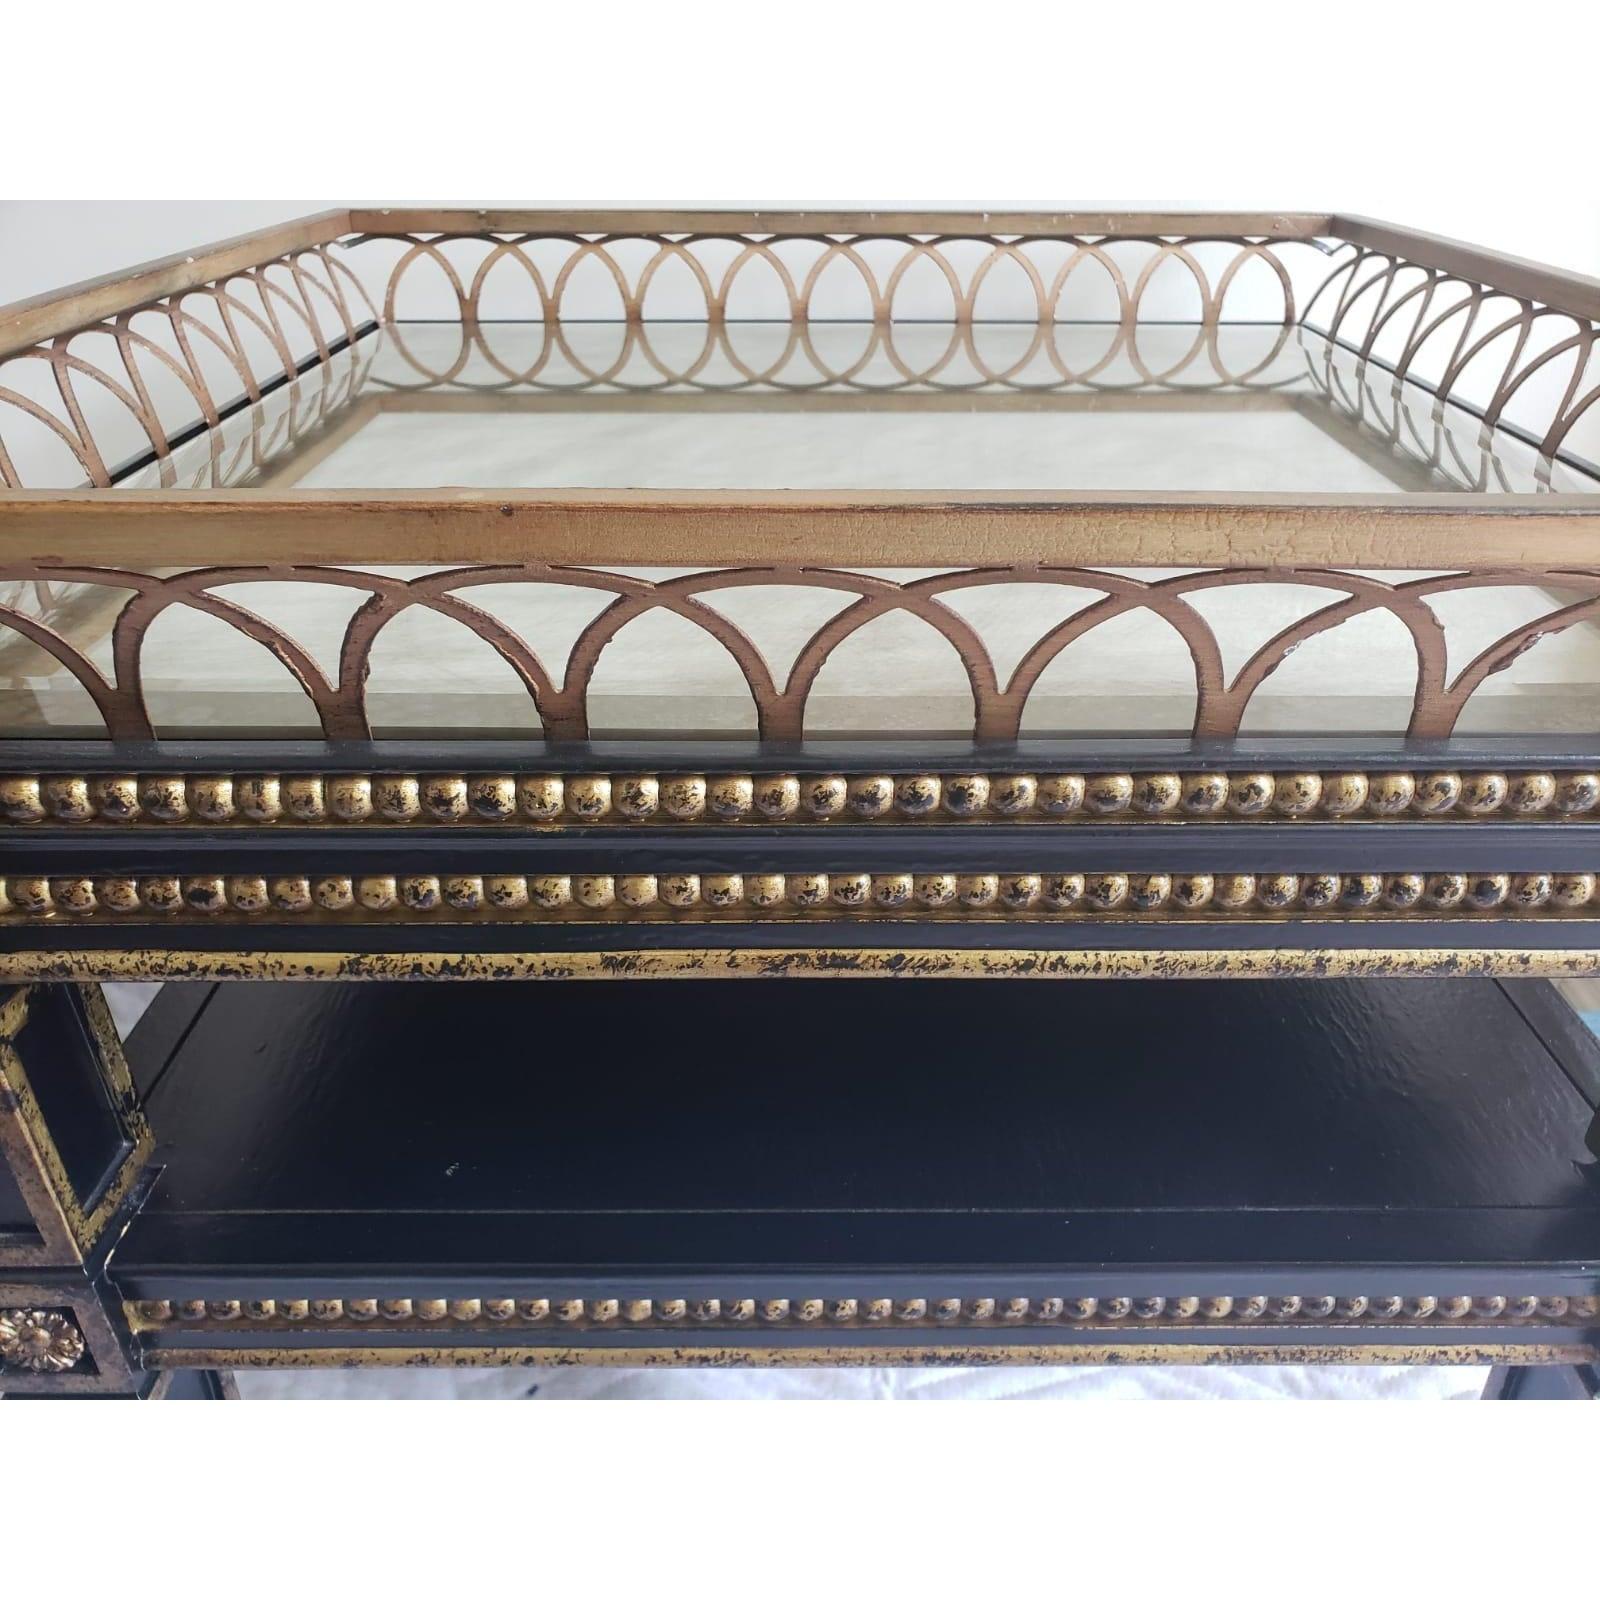 Two tier vintage neo classical giltwood frame side table, center table, topped with a golden metal ring and covered with a distressed and fogged mirror by design. Mirrored top is removable and in excellent condition.
Table measures 24